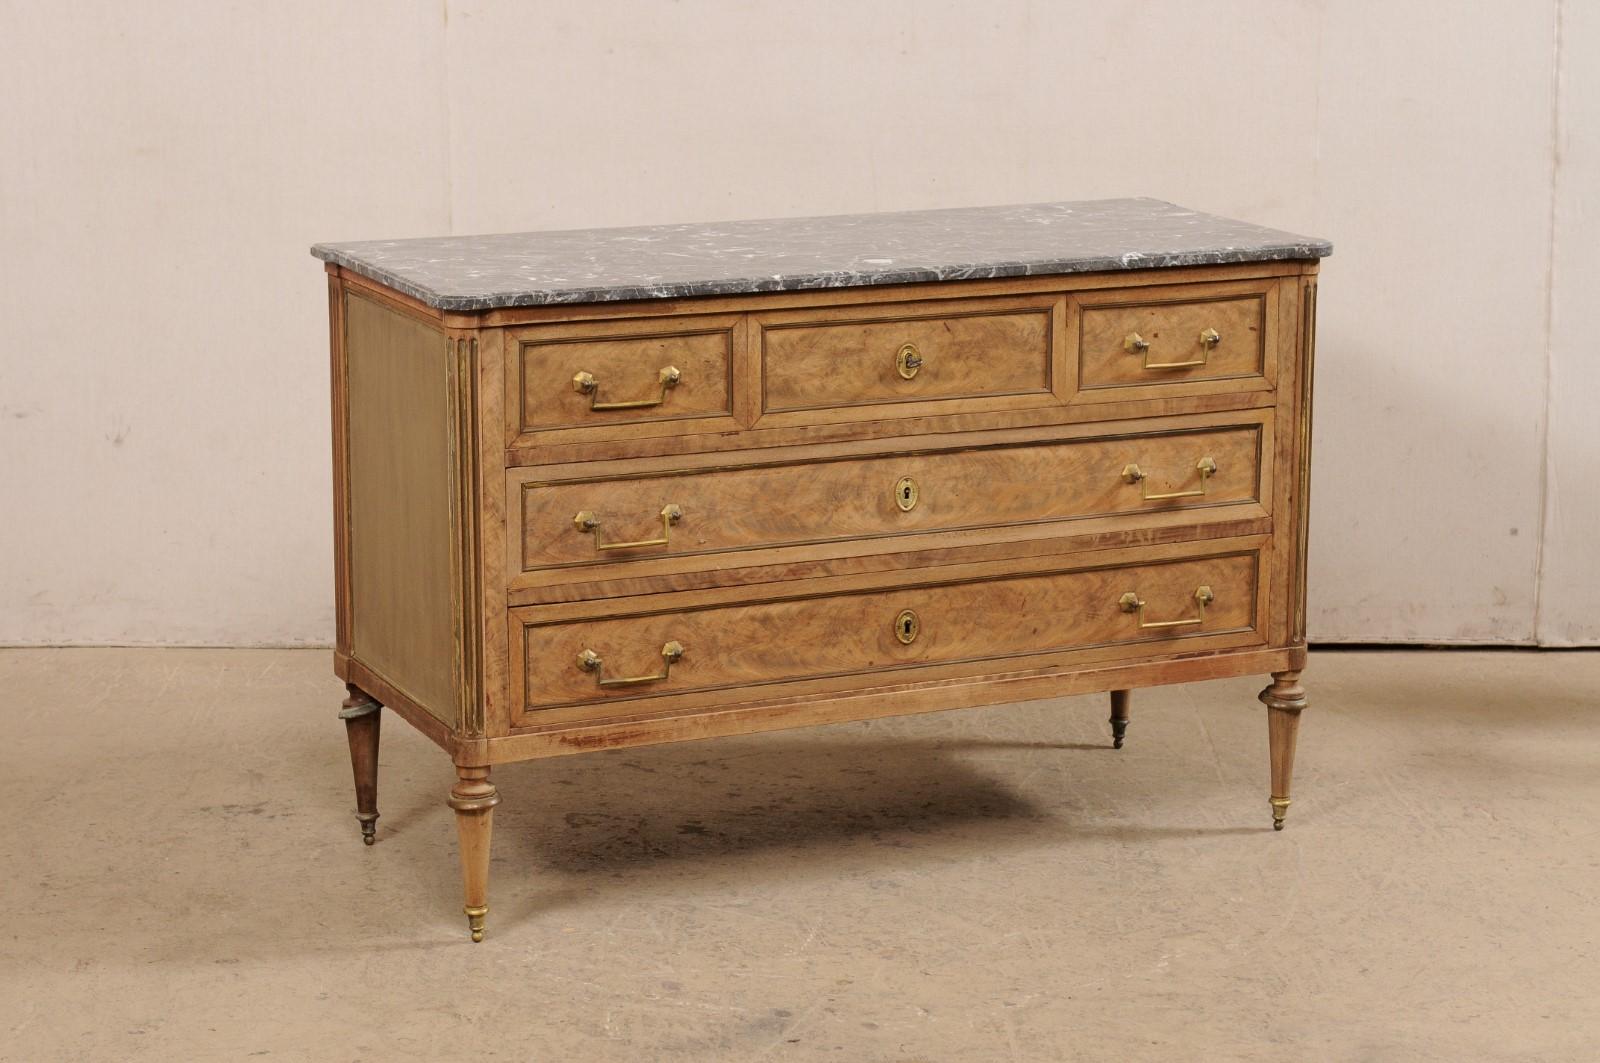 A French Neoclassical chest, with its original marble top and hardware, from the mid 19th century. This antique chest from France features a rectangular-shaped gray marble top with pronounced rounded front corners, which rests atop a neoclassical